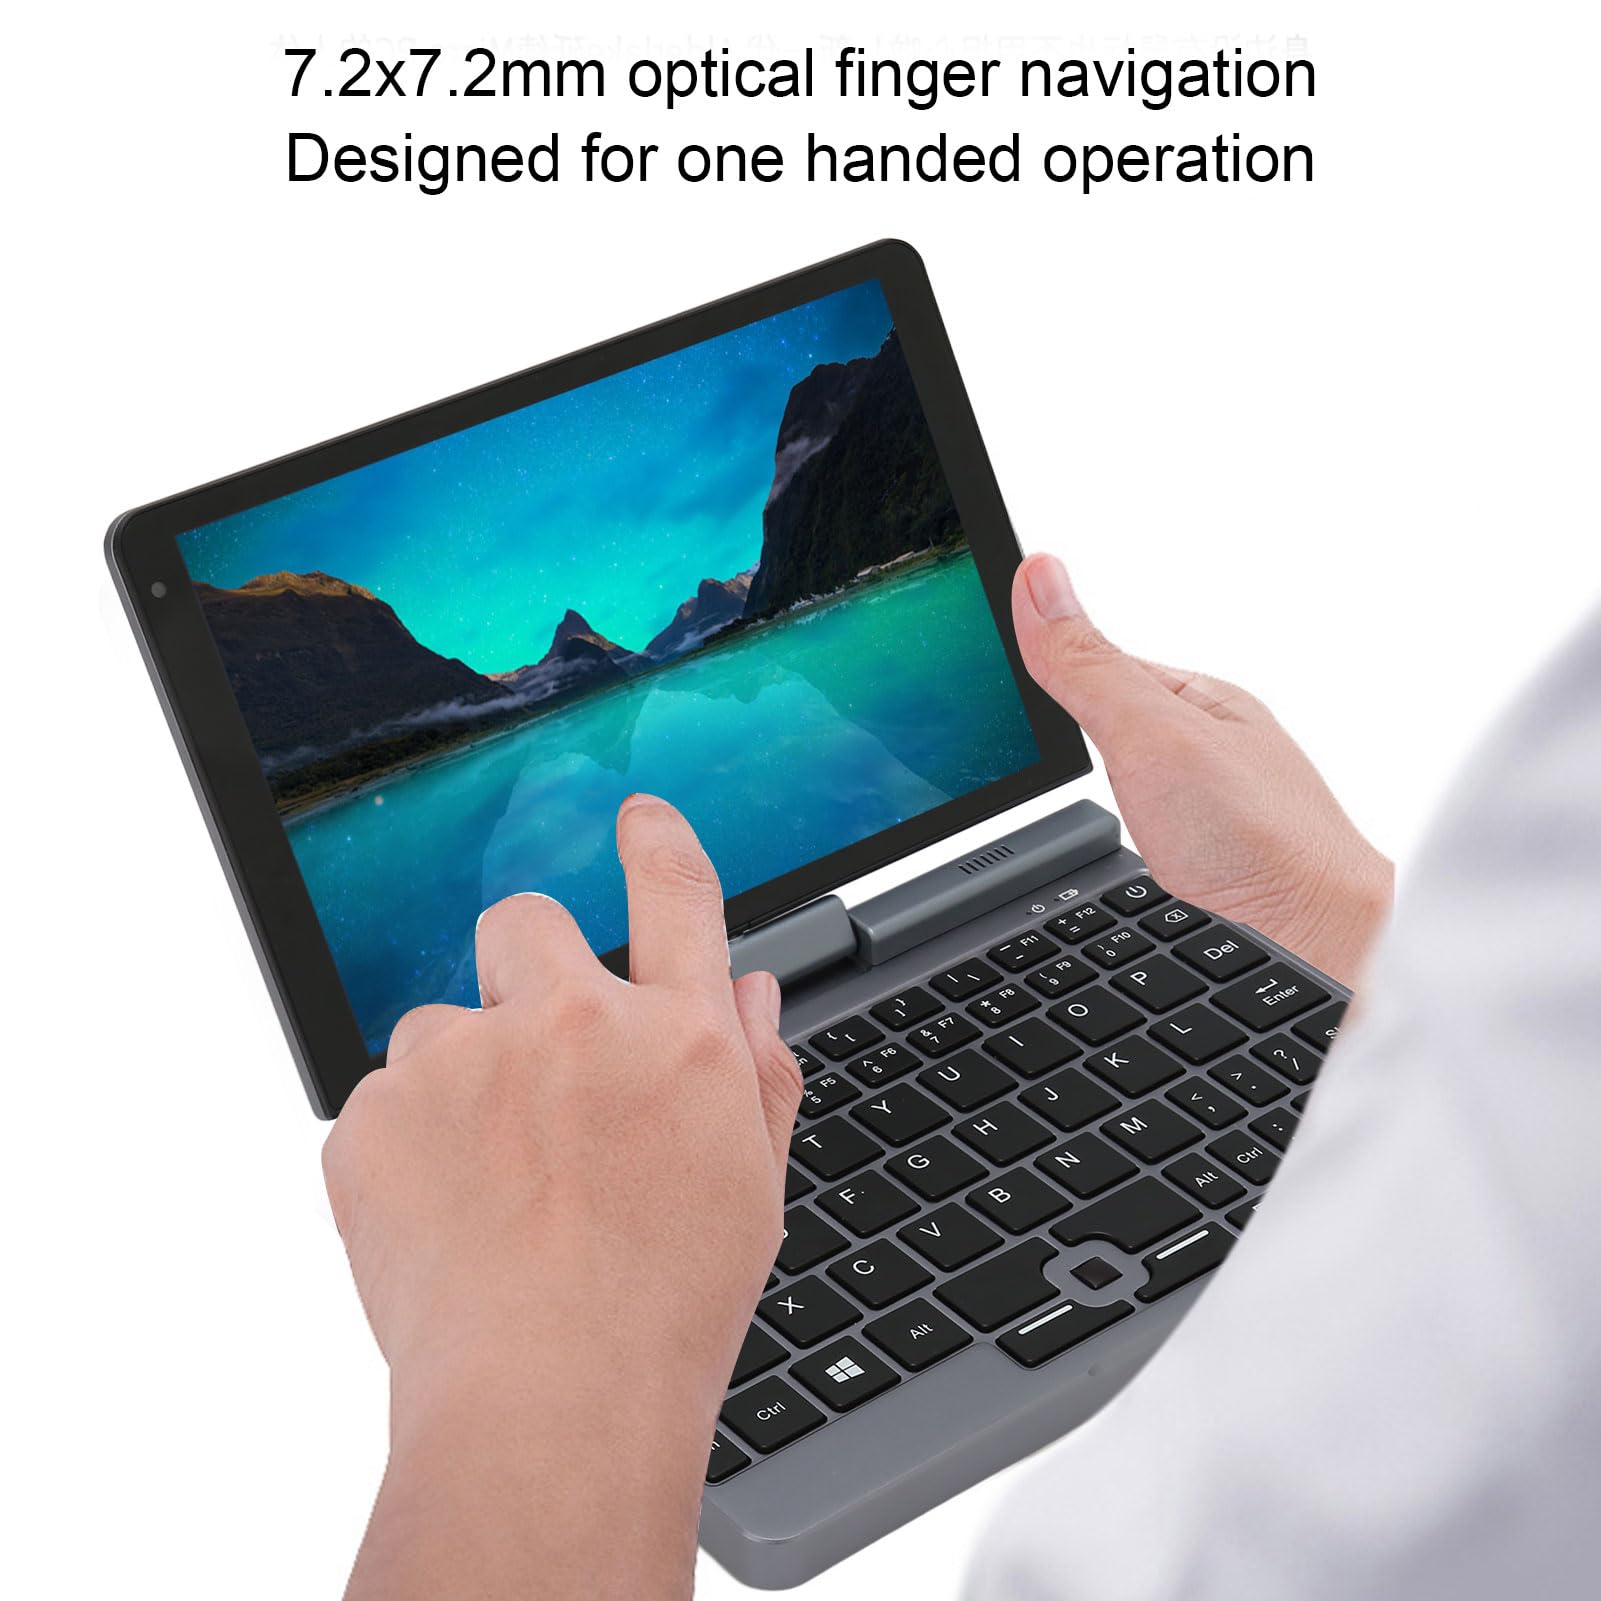 8 Inch Laptop, Micro PC, 1280 x 800 Touch Screen, LPDDR5 12GB RAM, for Intel Alder Lake Mini Laptop with Stylus for Windows 11, Type C, DisplayPort, HDMI, WiFi, Bluetooth